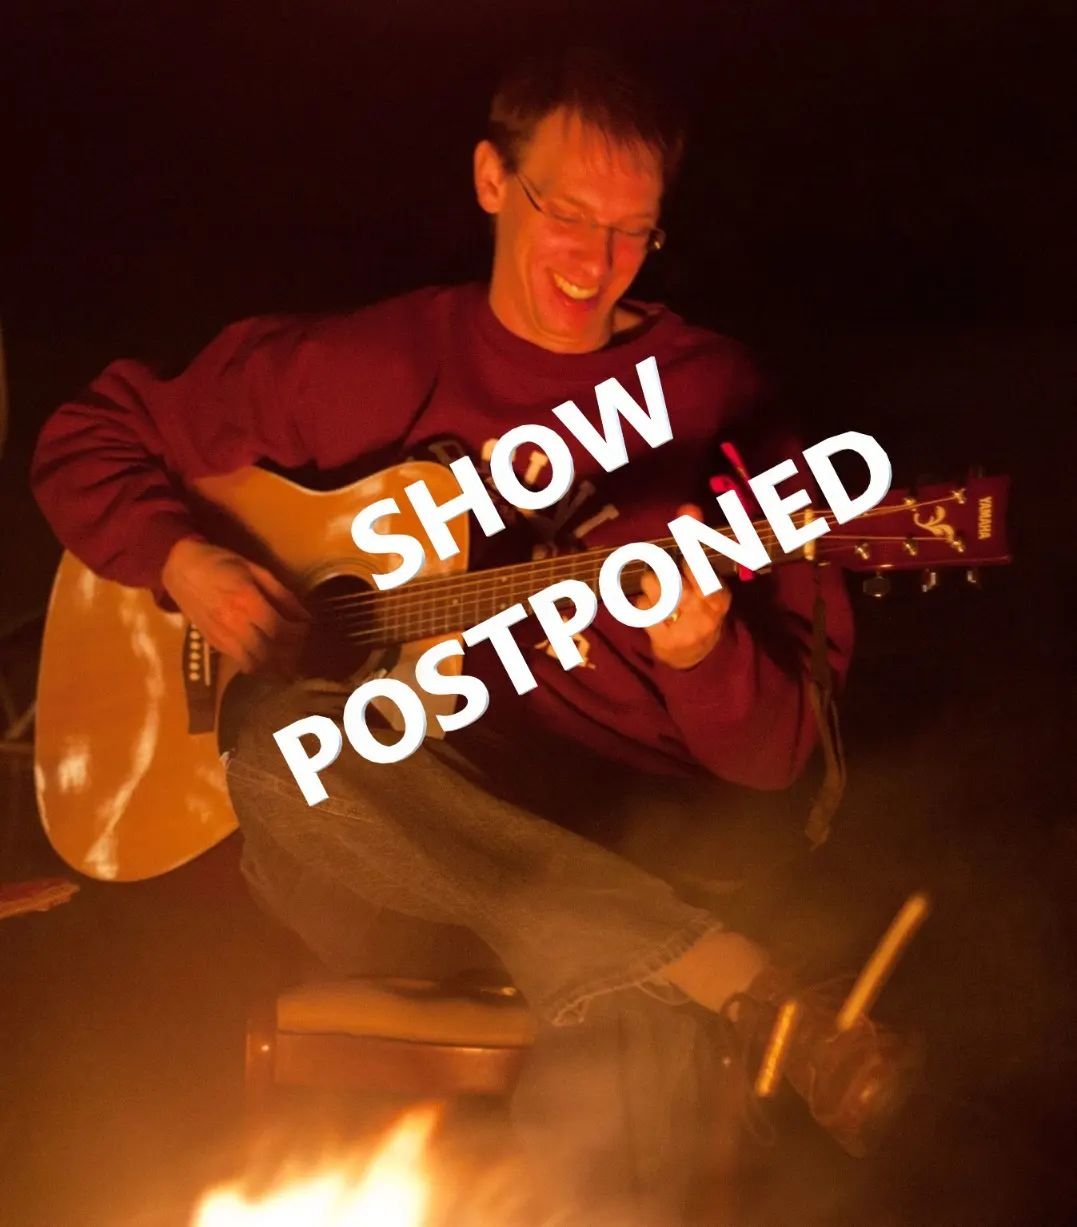 This weekend's show at Muddy Creek Cafe at Old Salem has been postponed. We are working with the venue to reschedule and hope to make that announcement very soon. Stay tuned, and thank you for your support!!